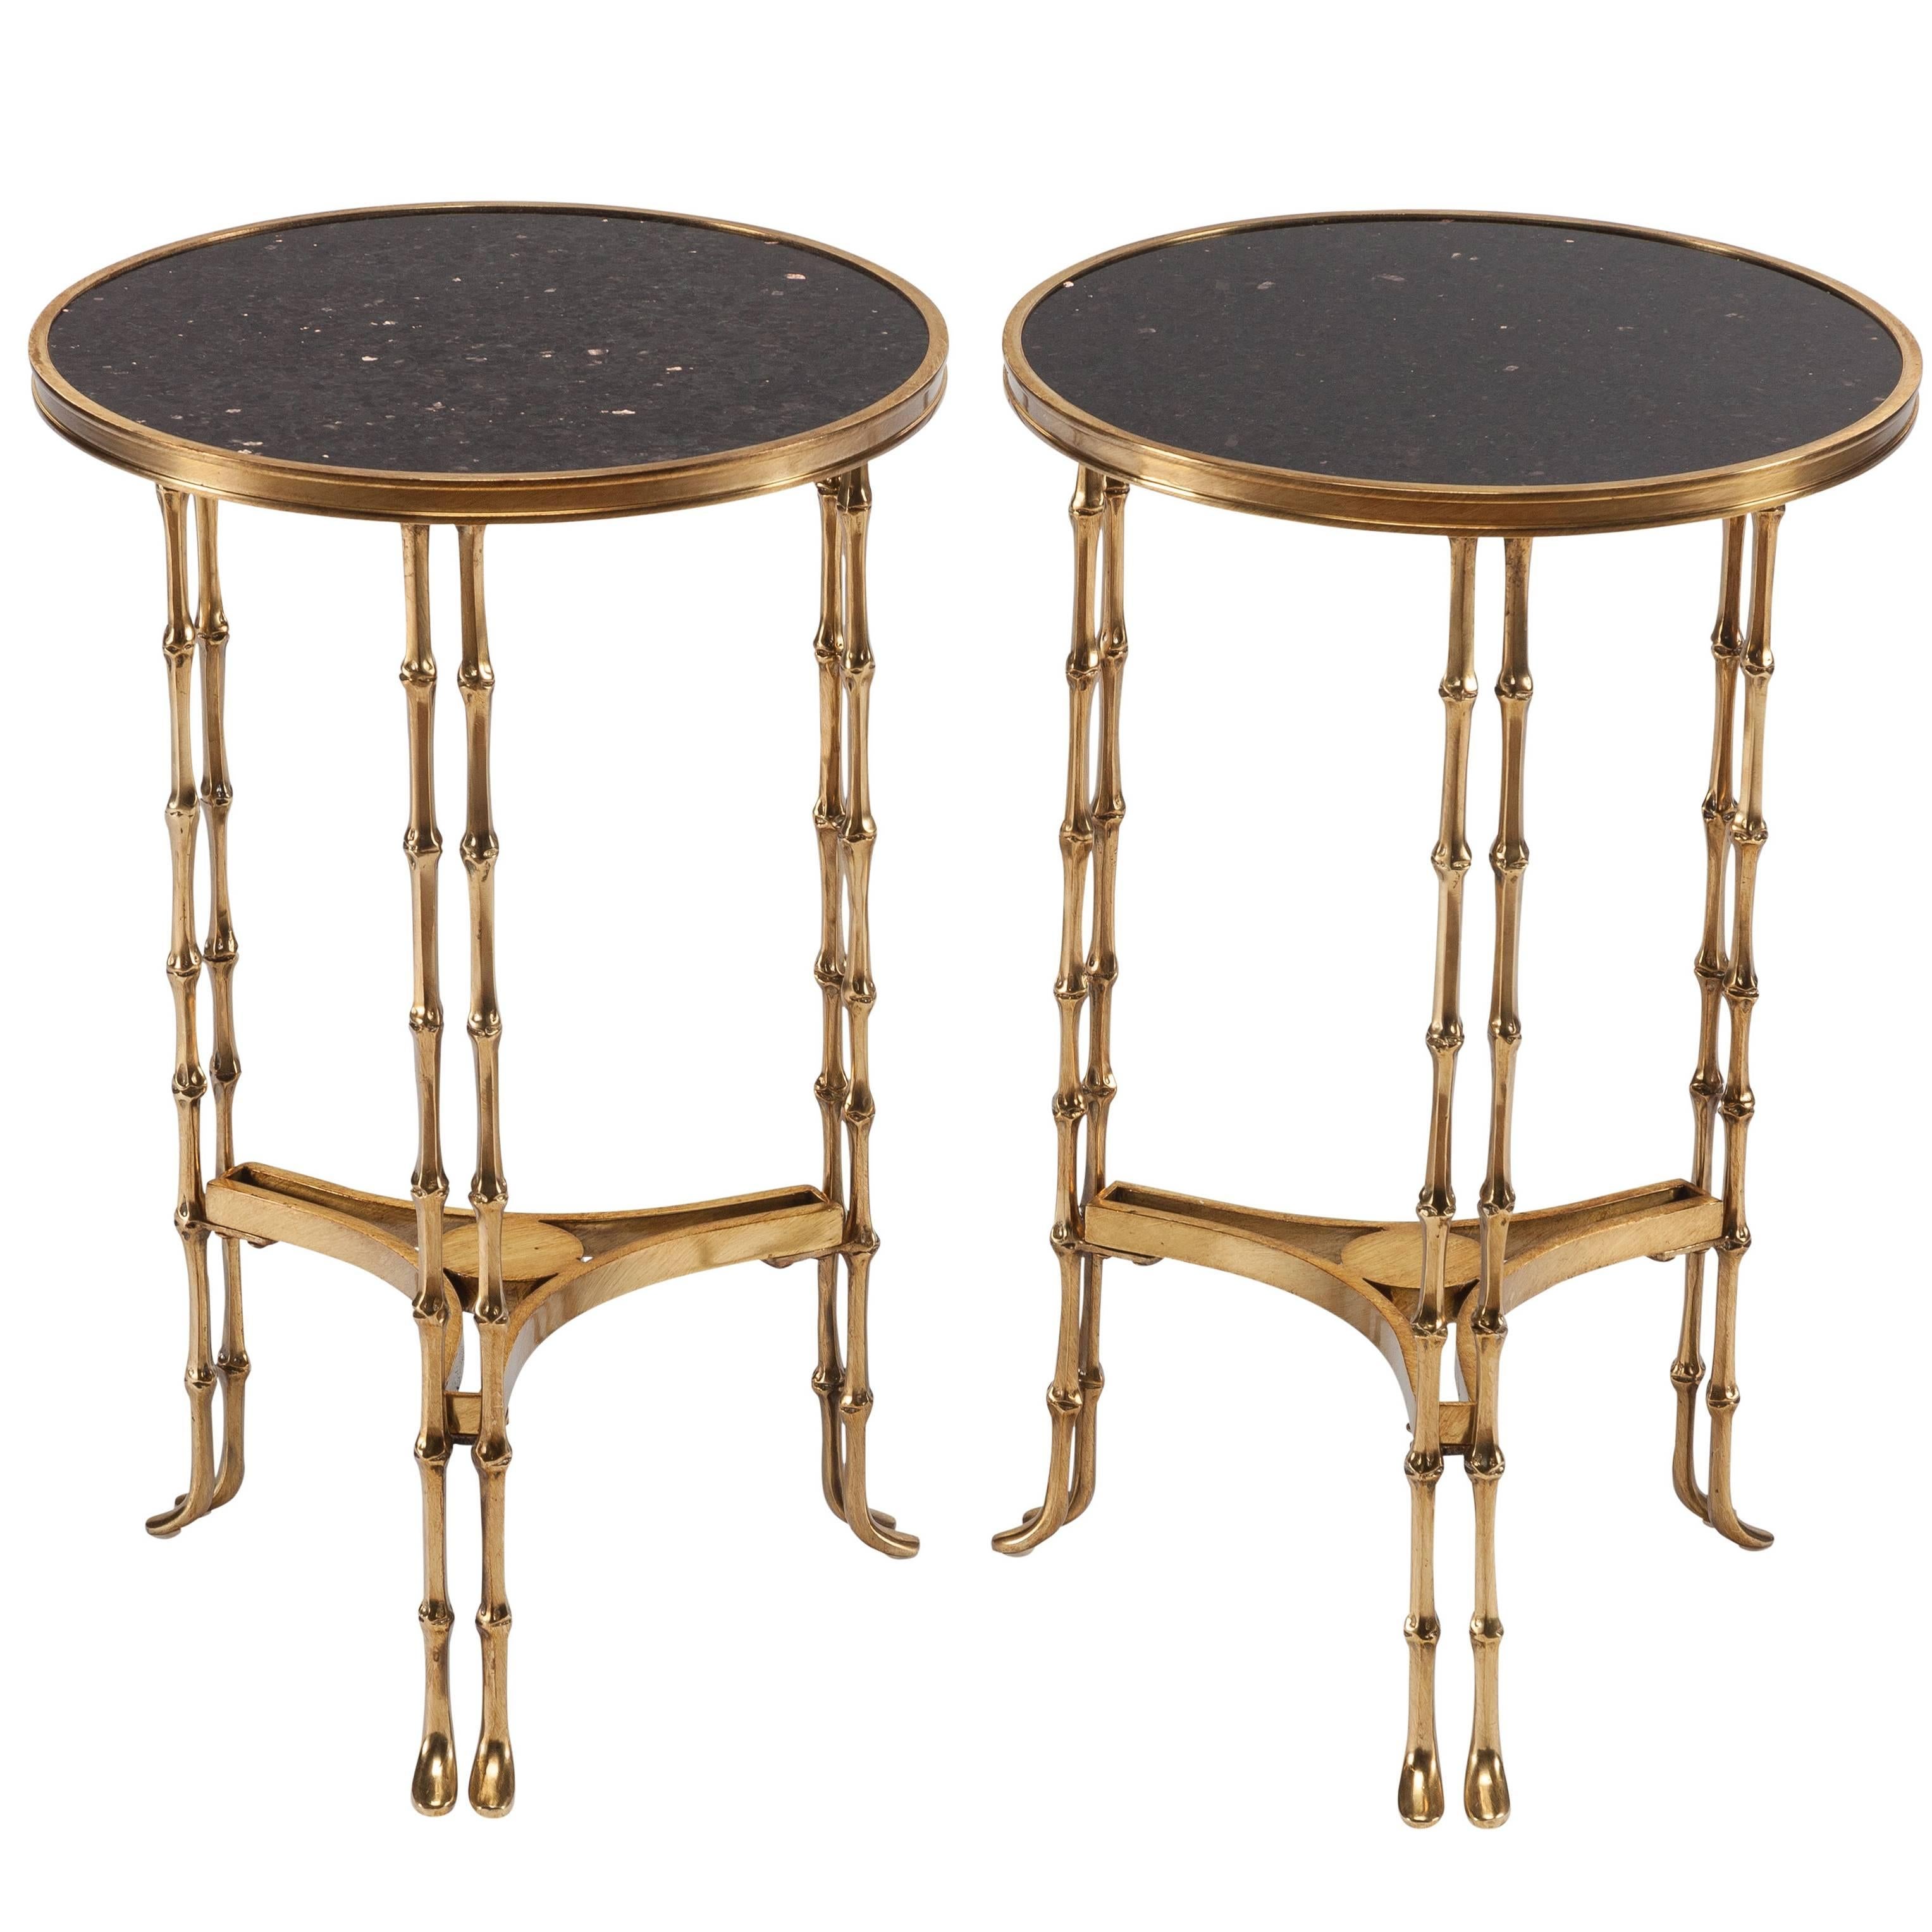 Pair of Early 20th Century French Neoclassical Bronze and Granite End Tables